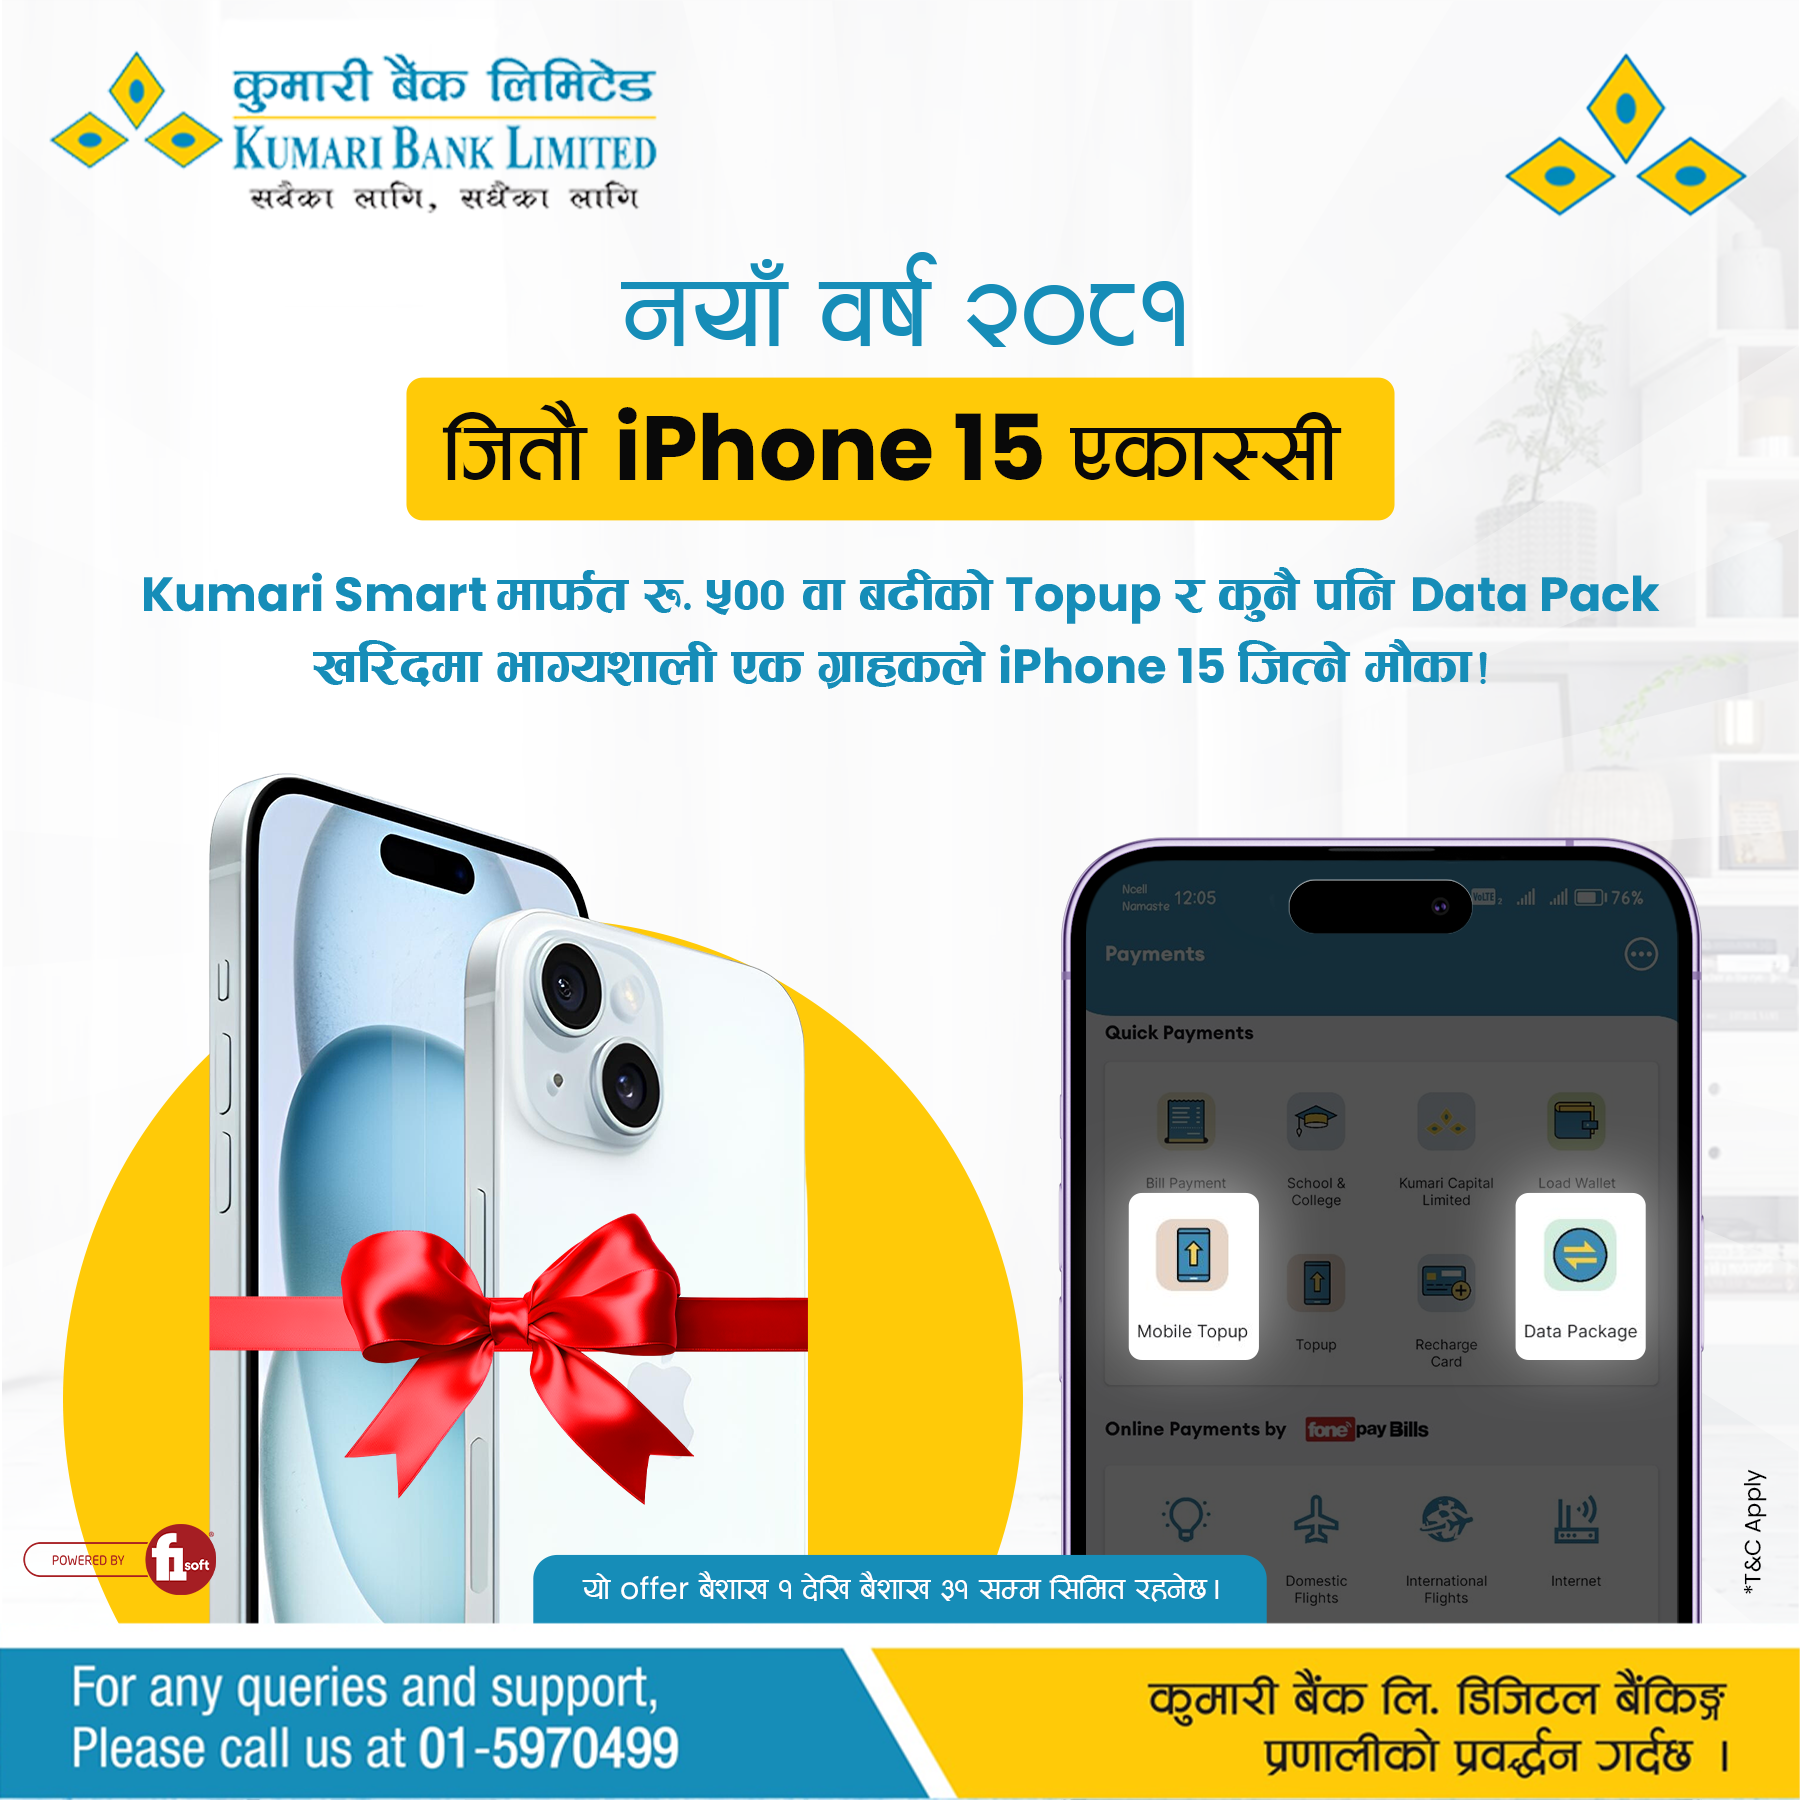 Kumari Bank’s new year offer: one lucky customer stands a chance to win iPhone 15